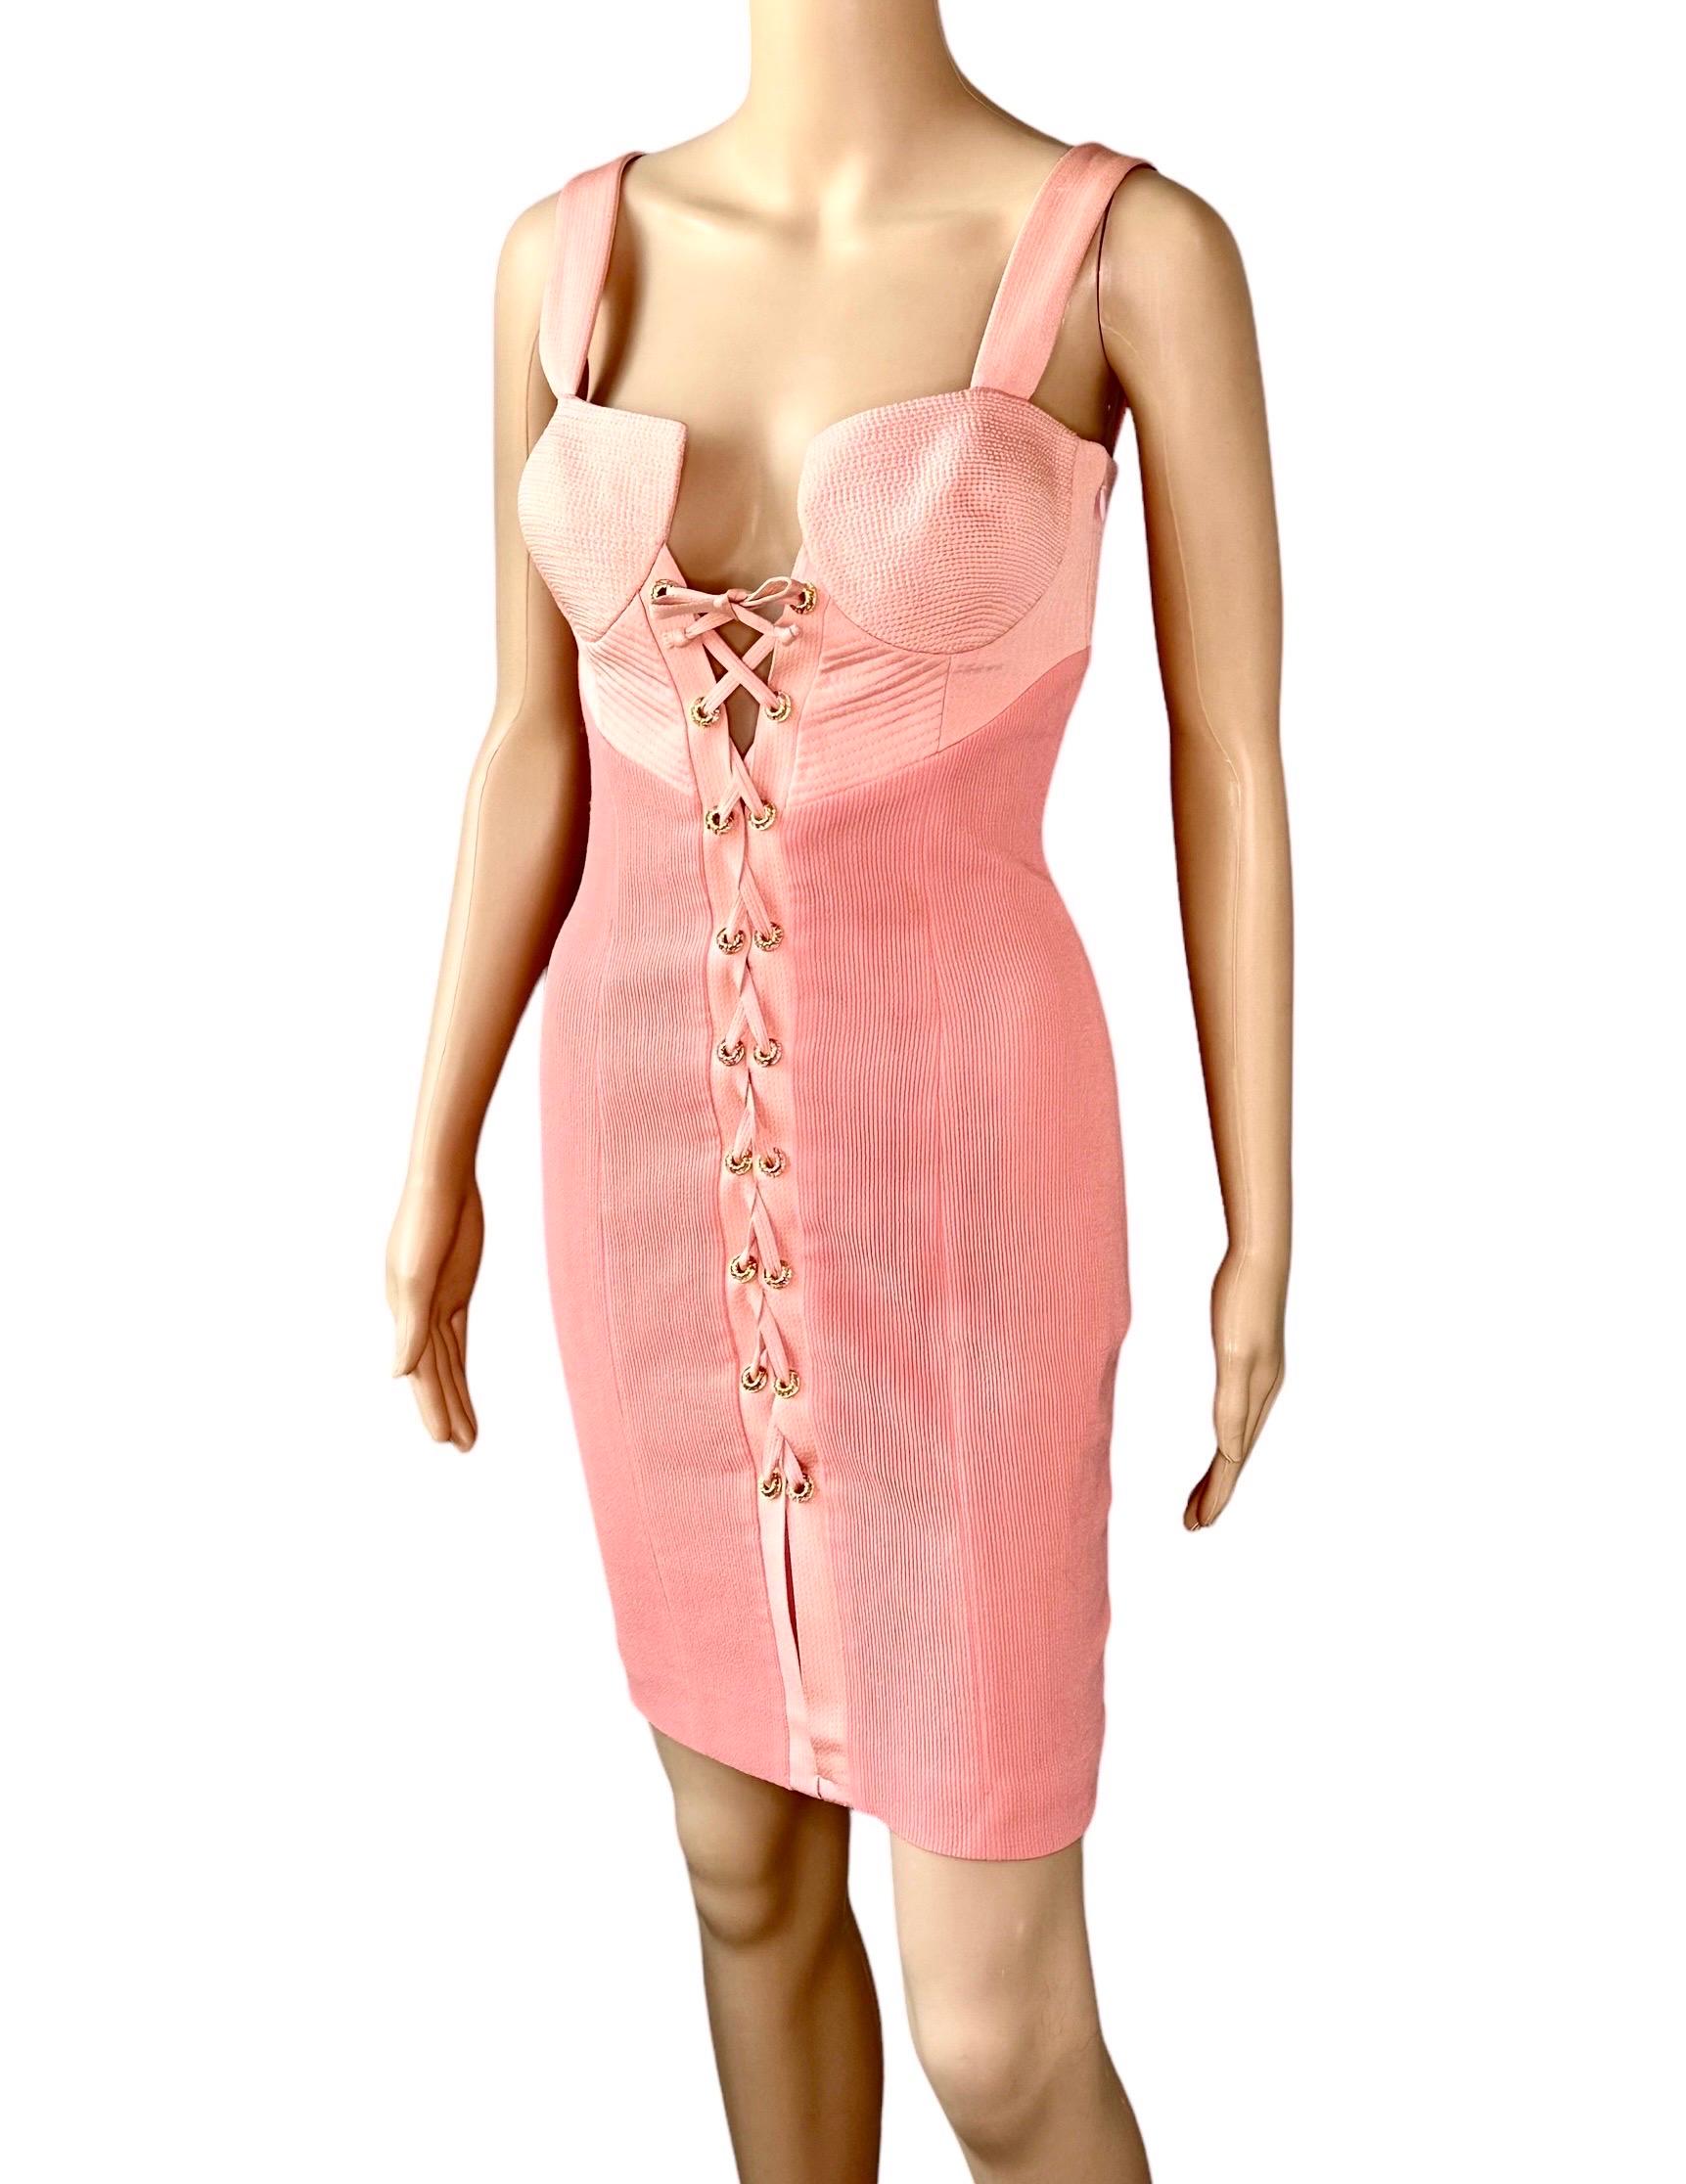 Gianni Versace S/S 1992 Couture Bustier Corset Lace Up Mini Dress IT 40

Condition: Good Vintage Condition. A couple missing embellishments on the grommets as is common with Gianni Versace pieces, not noticeable when worn.